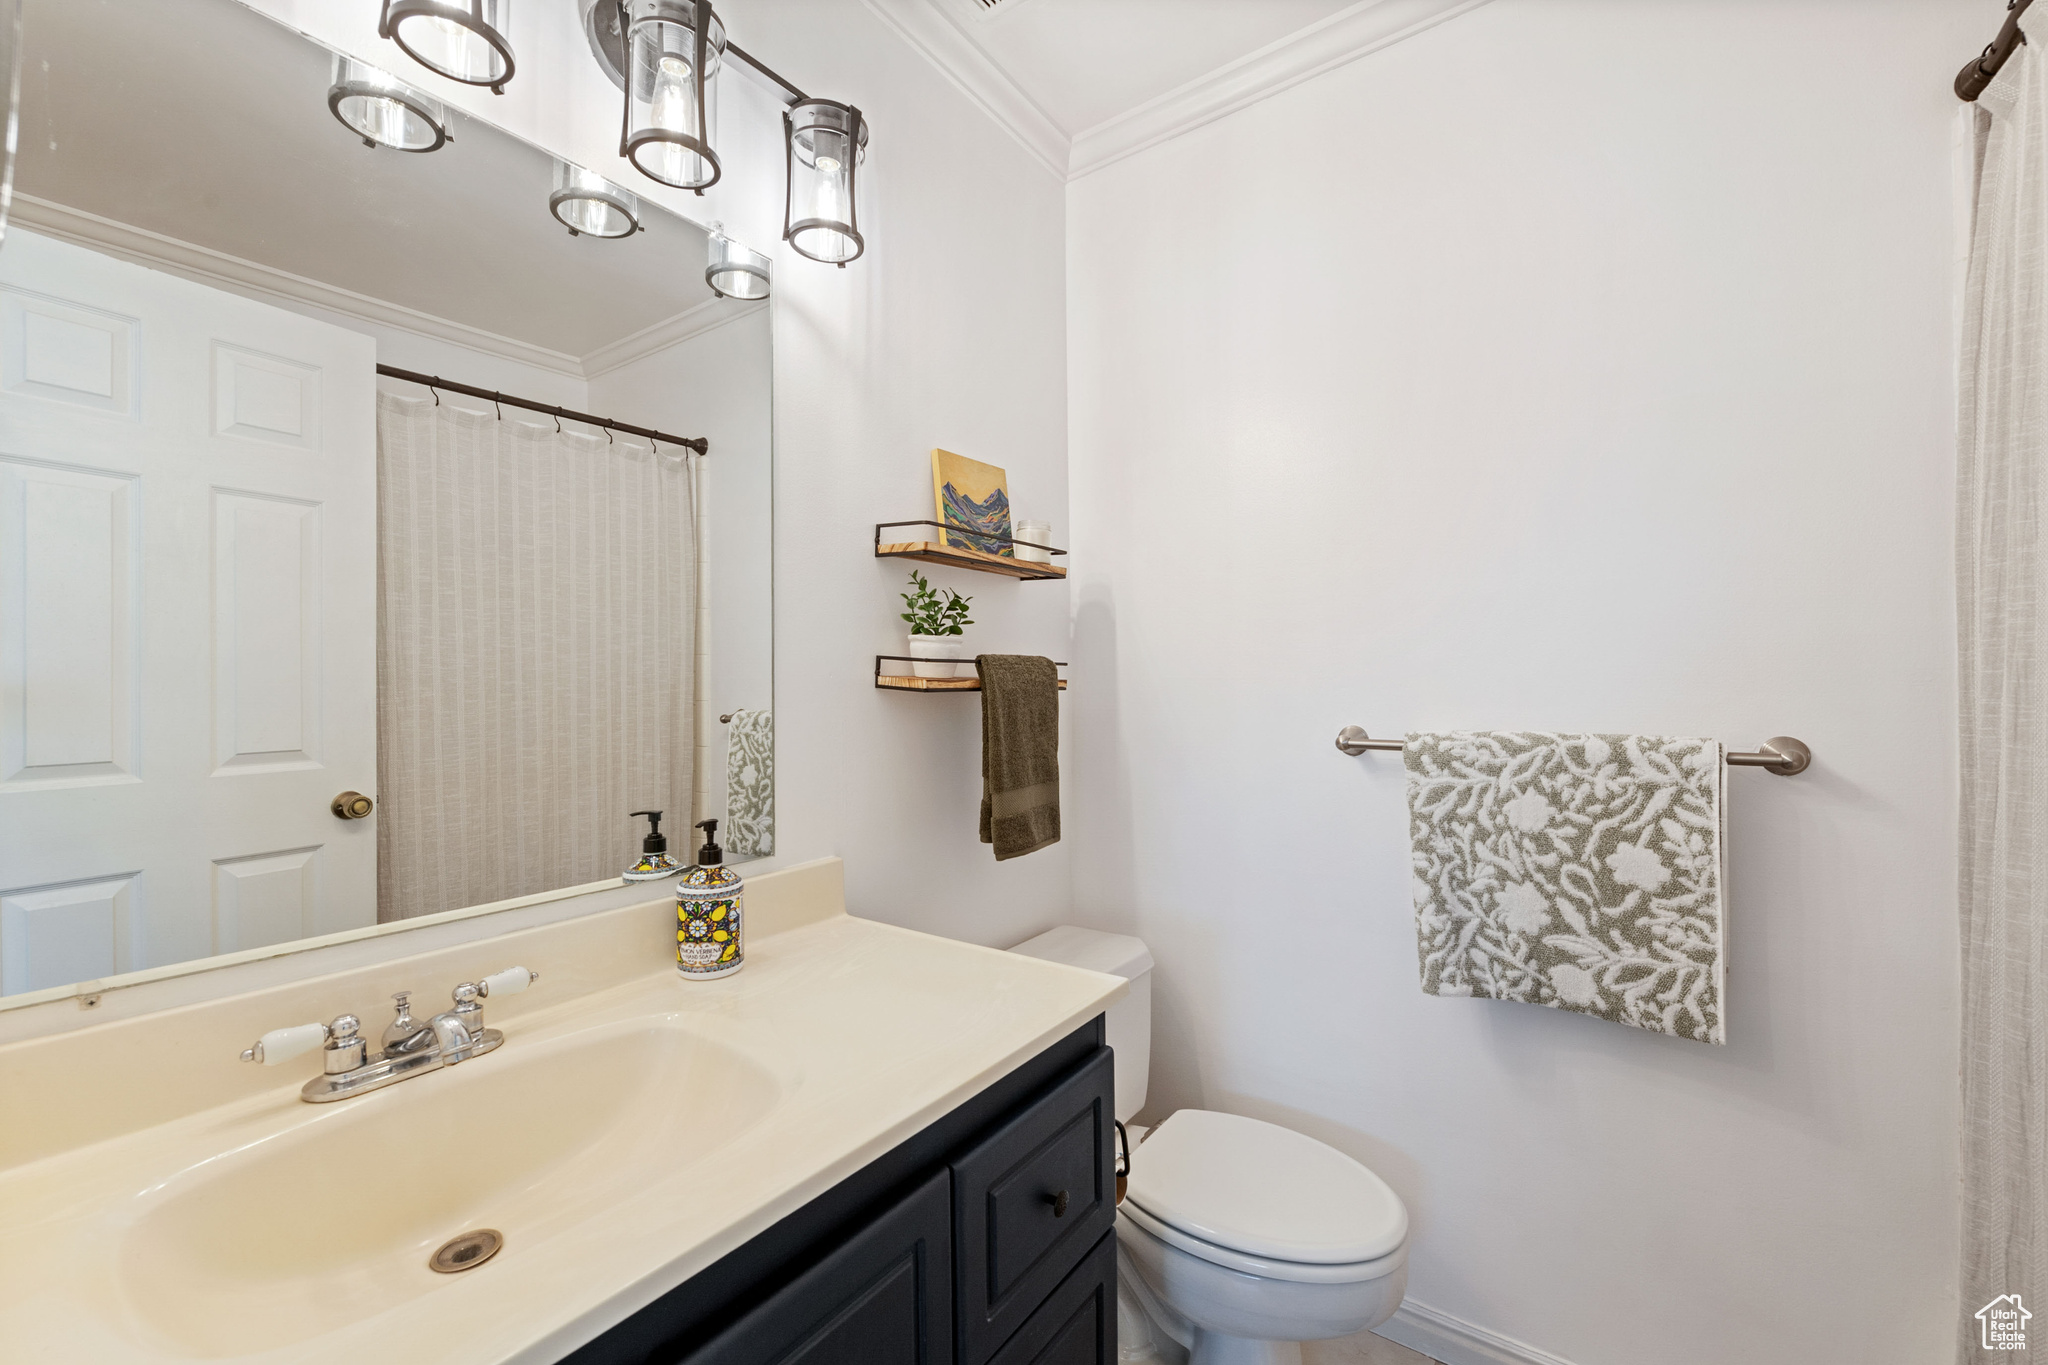 Bathroom with vanity with extensive cabinet space, crown molding, and toilet